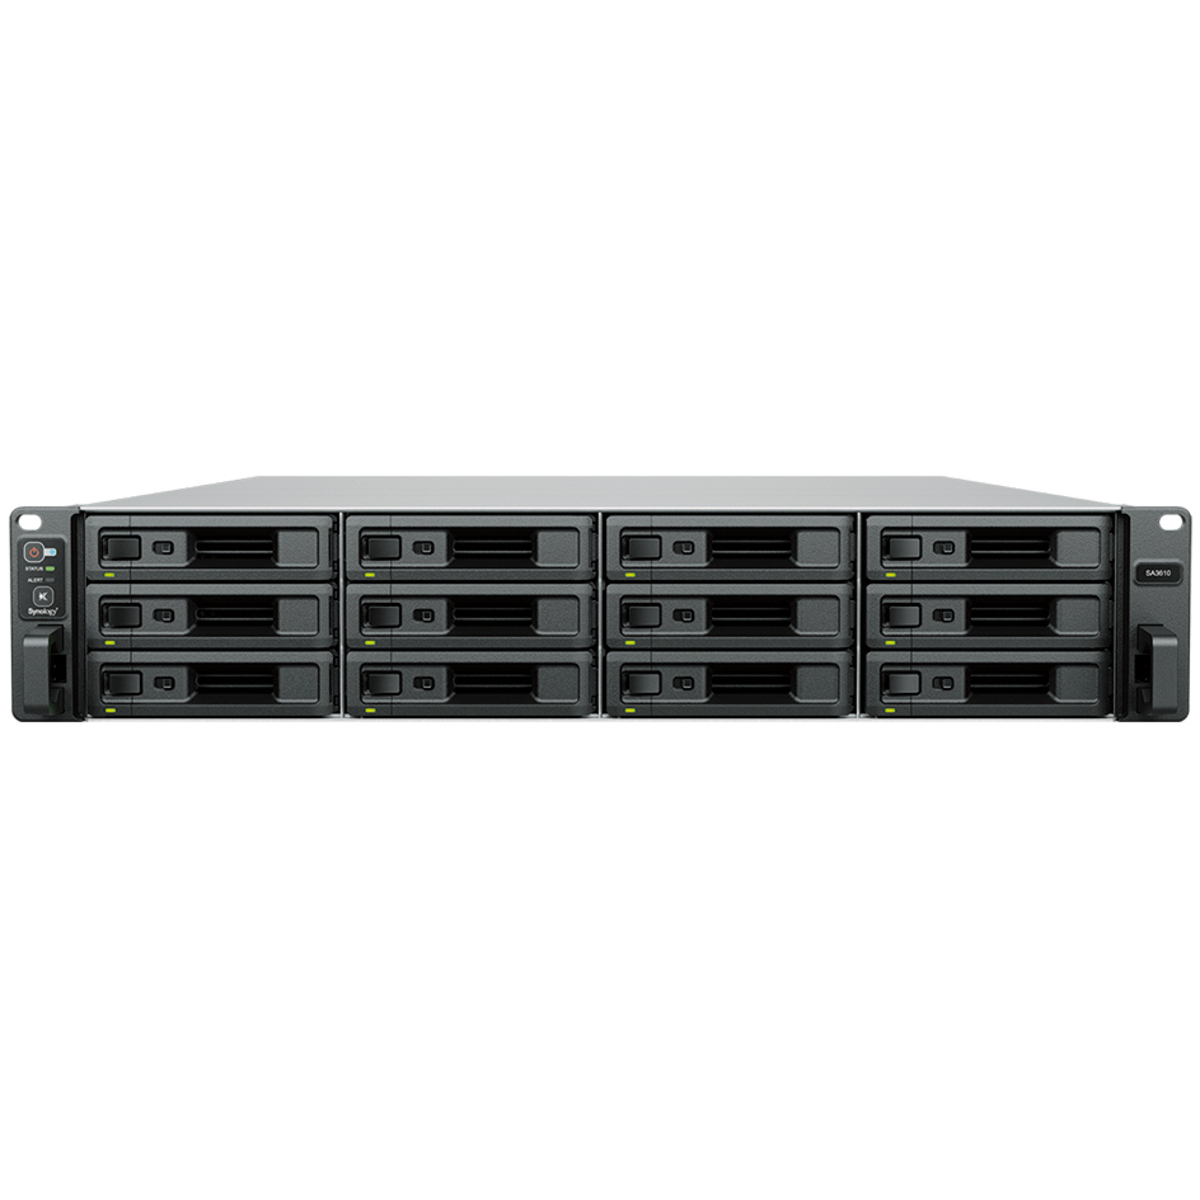 Synology RackStation SA3610 216tb 12-Bay RackMount Large Business / Enterprise NAS - Network Attached Storage Device 12x18tb Synology HAT5310 Series HAT5310-18T 3.5 7200rpm SATA 6Gb/s HDD ENTERPRISE Class Drives Installed - Burn-In Tested RackStation SA3610